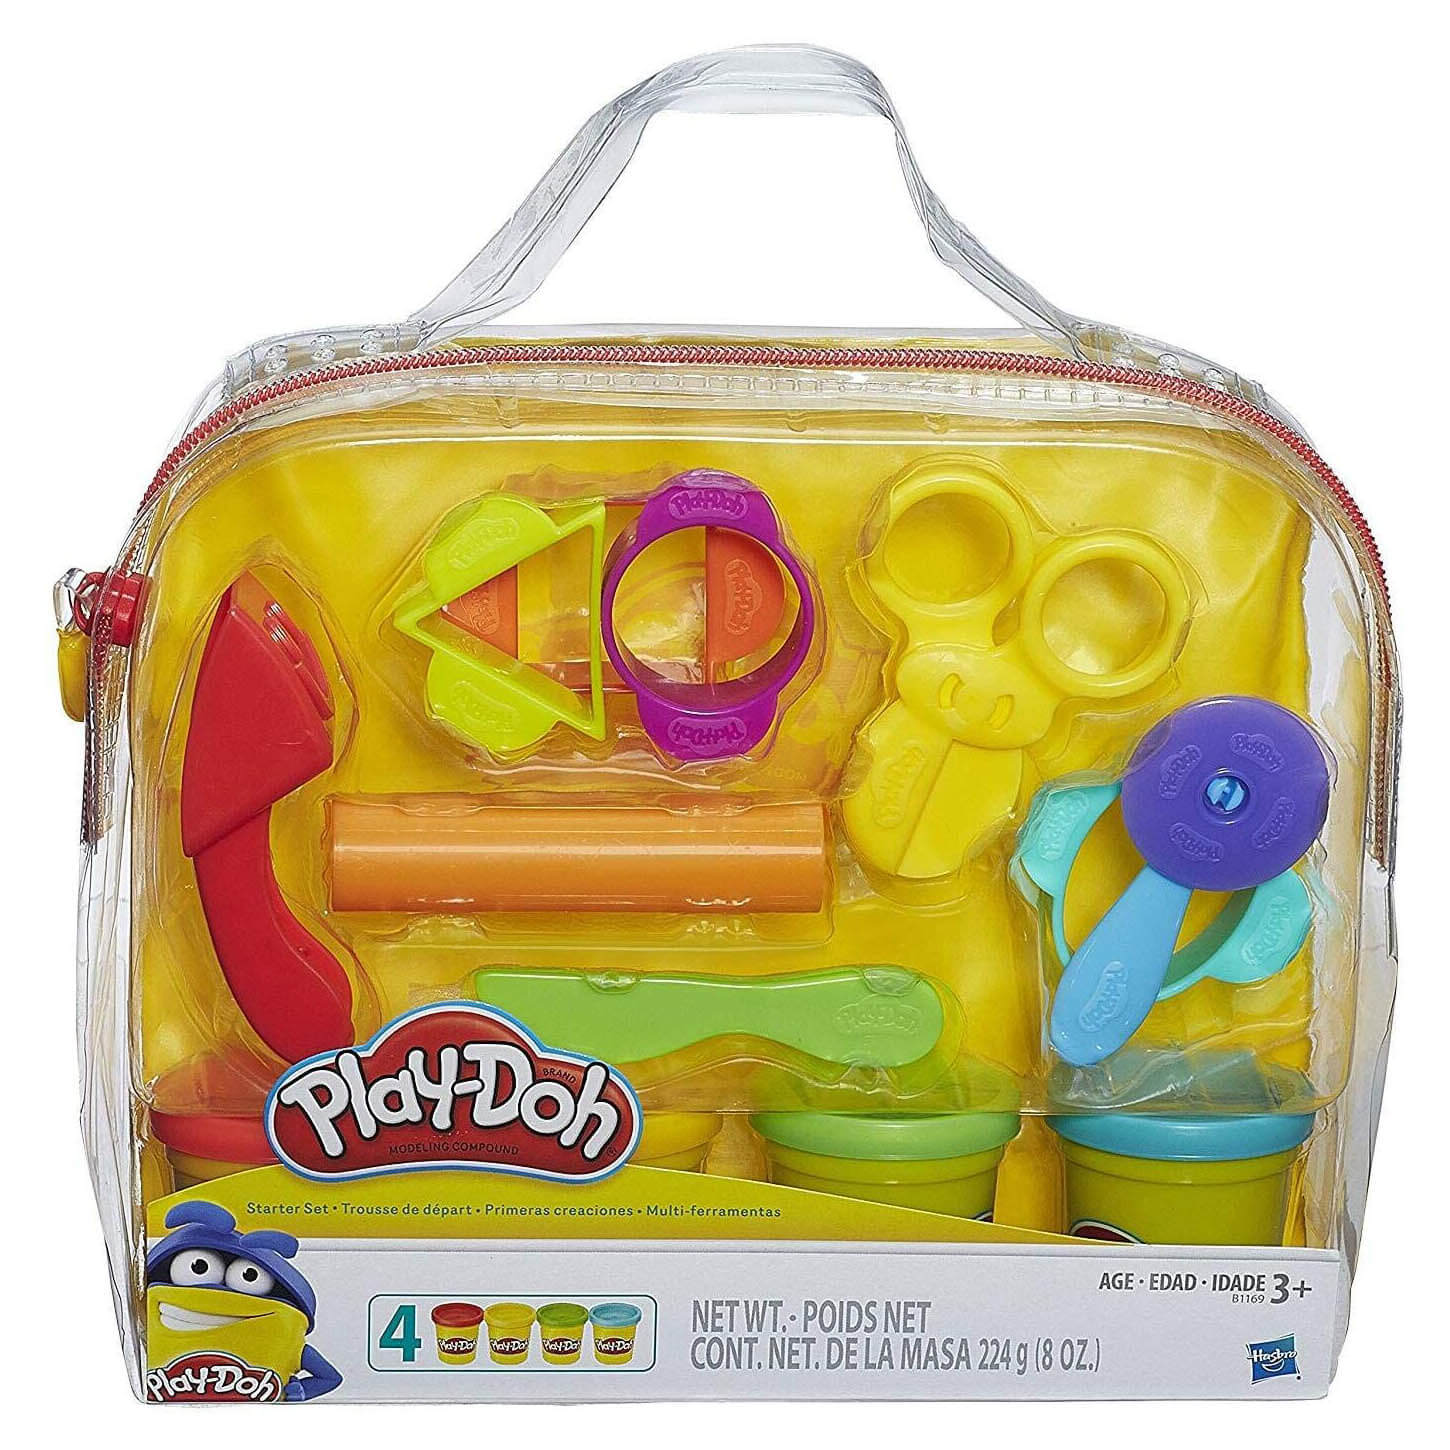 Play-Doh Starter Set with 4 Cans